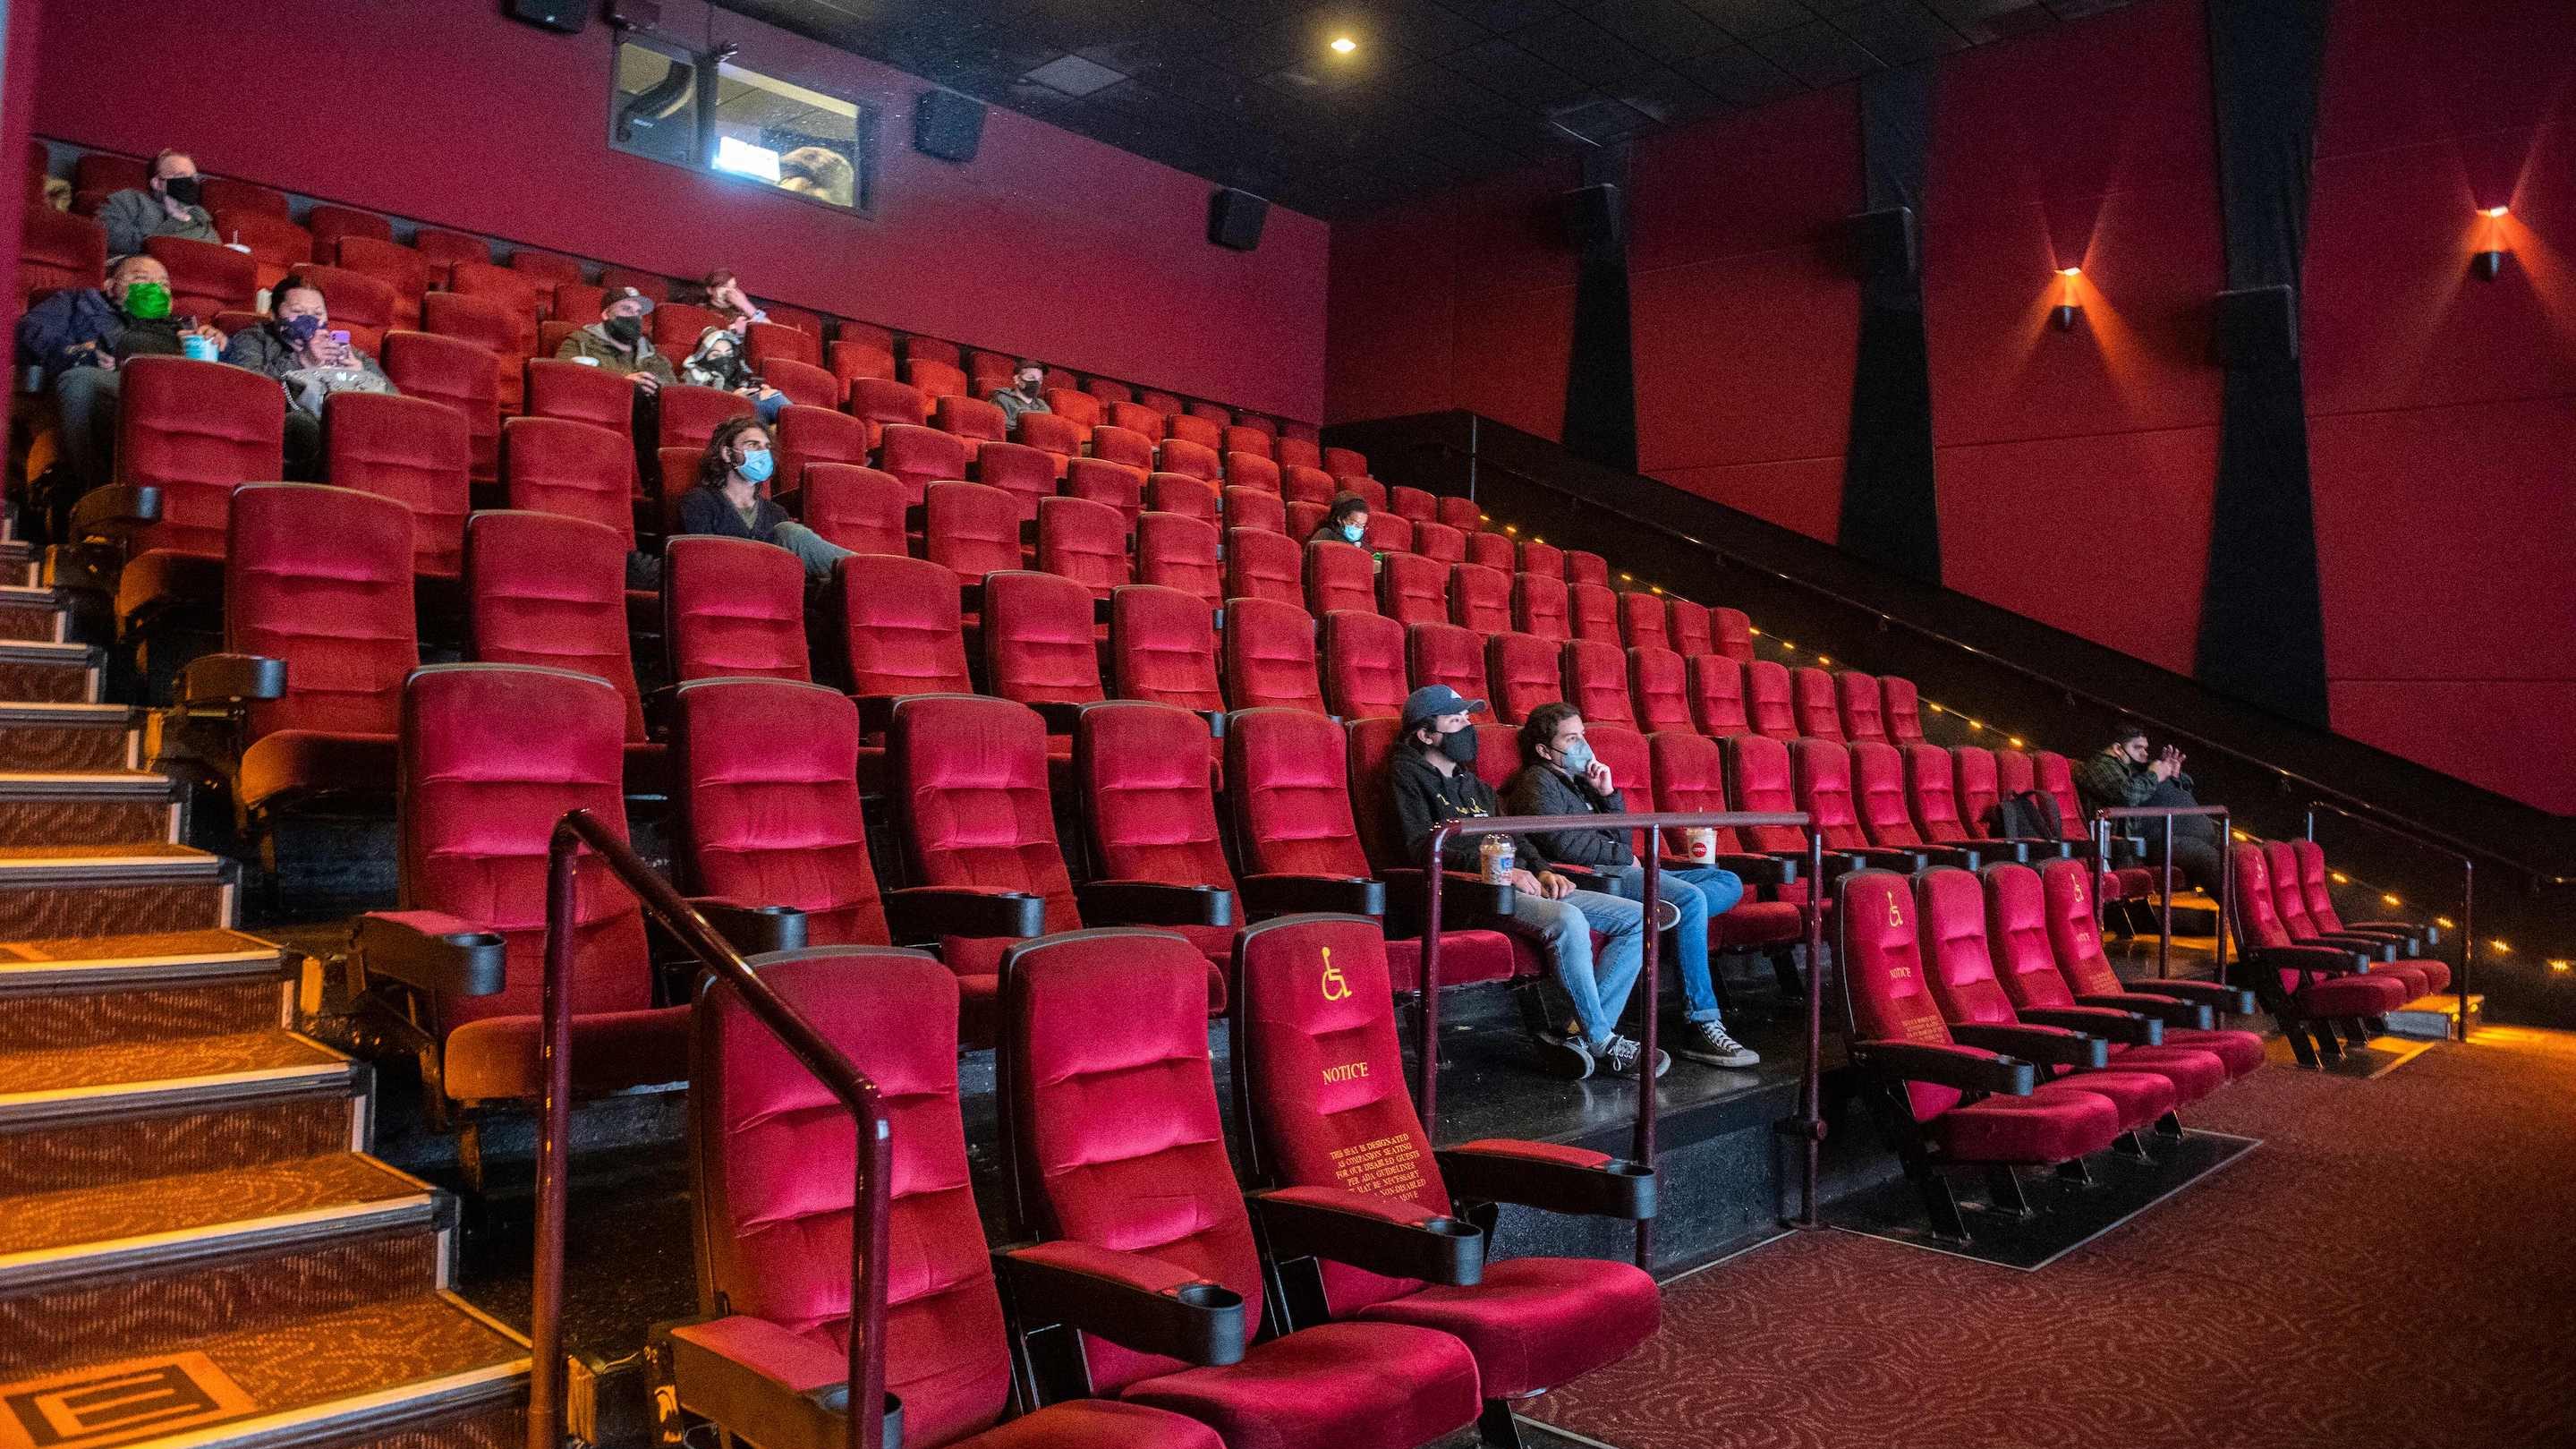 Are audiences ready to return to movie theaters? Marketplace